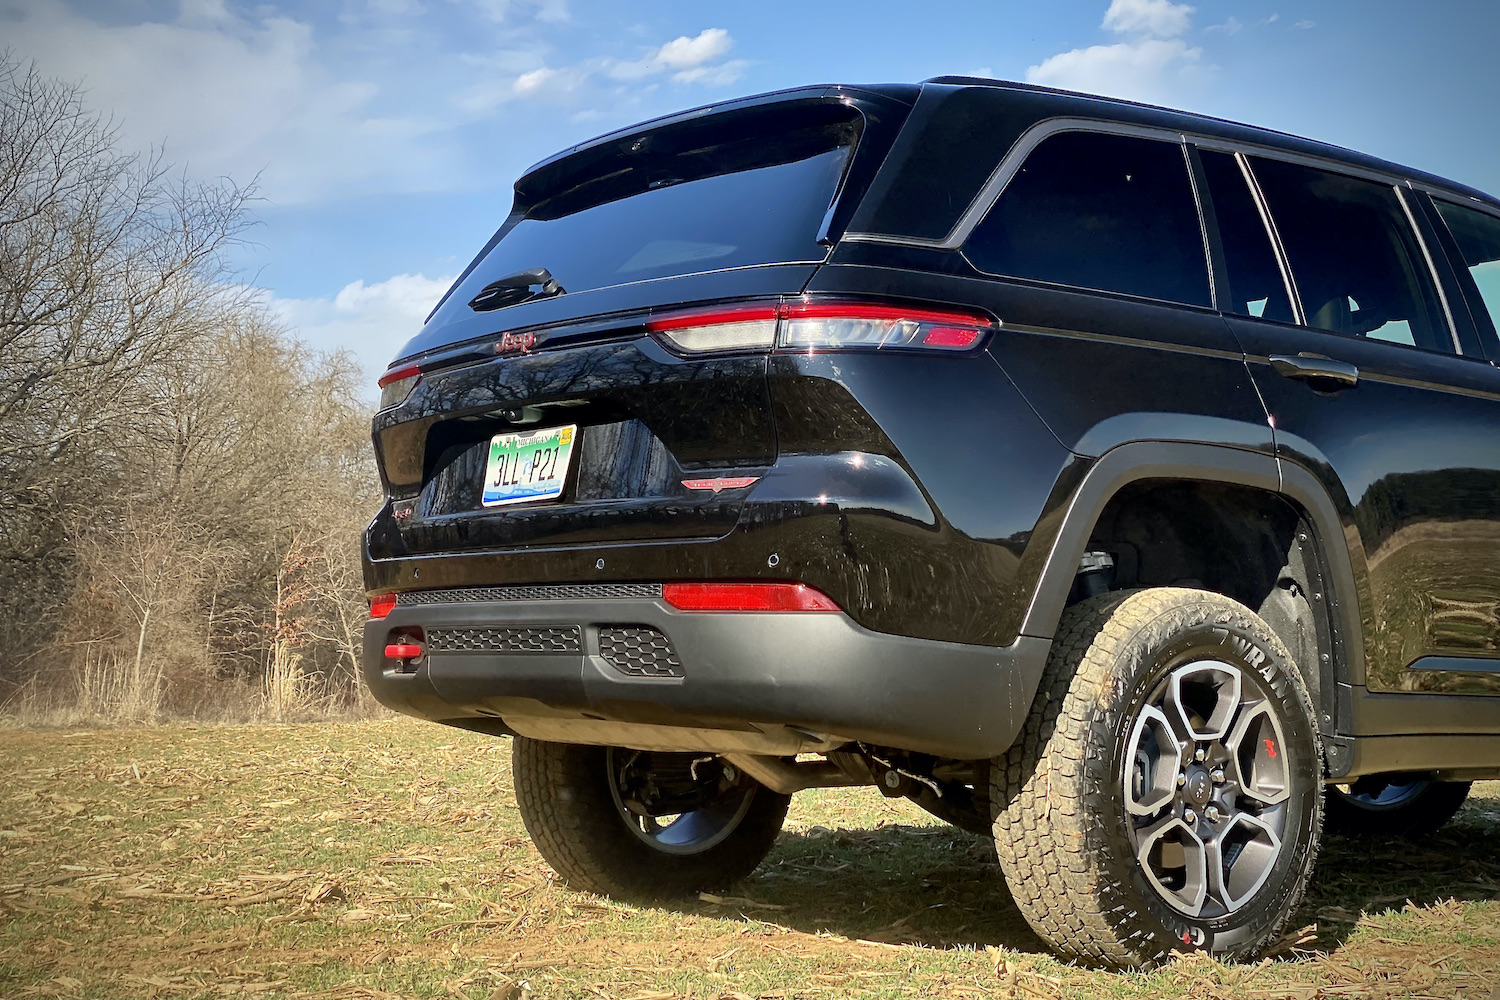 Close up of rear end of 2022 Jeep Grand Cherokee Trailhawk on a grassy field with trees in the background.